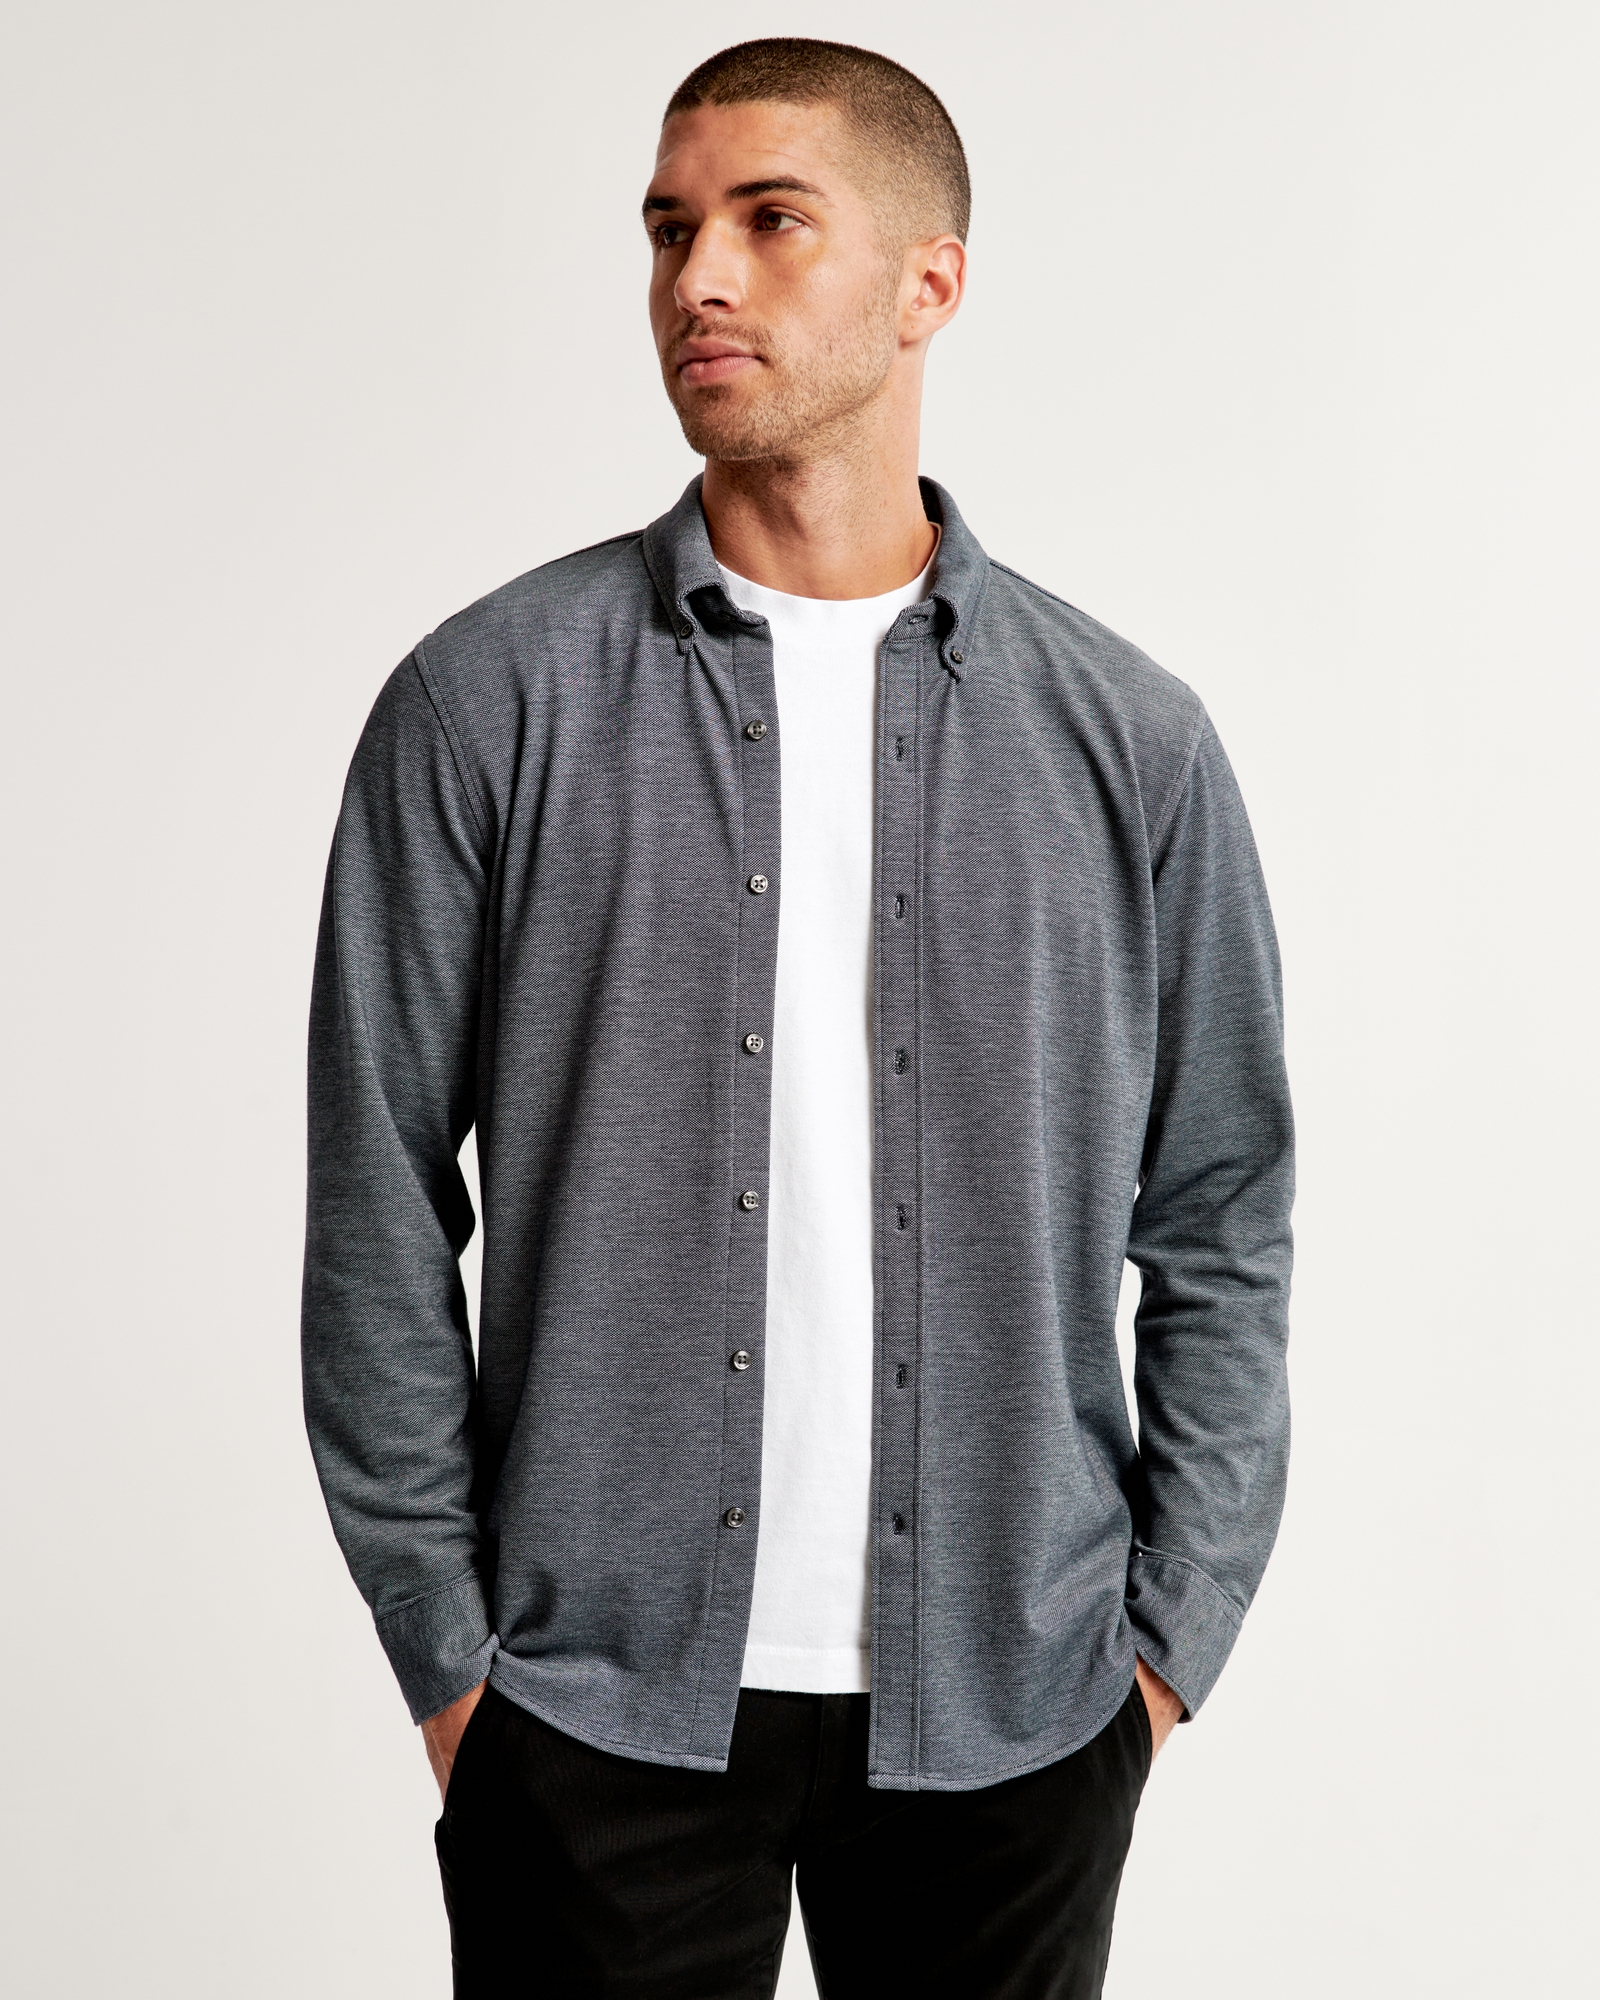 Men's Long-Sleeve Performance Button-Up Shirt in Gray | Size S | Abercrombie & Fitch